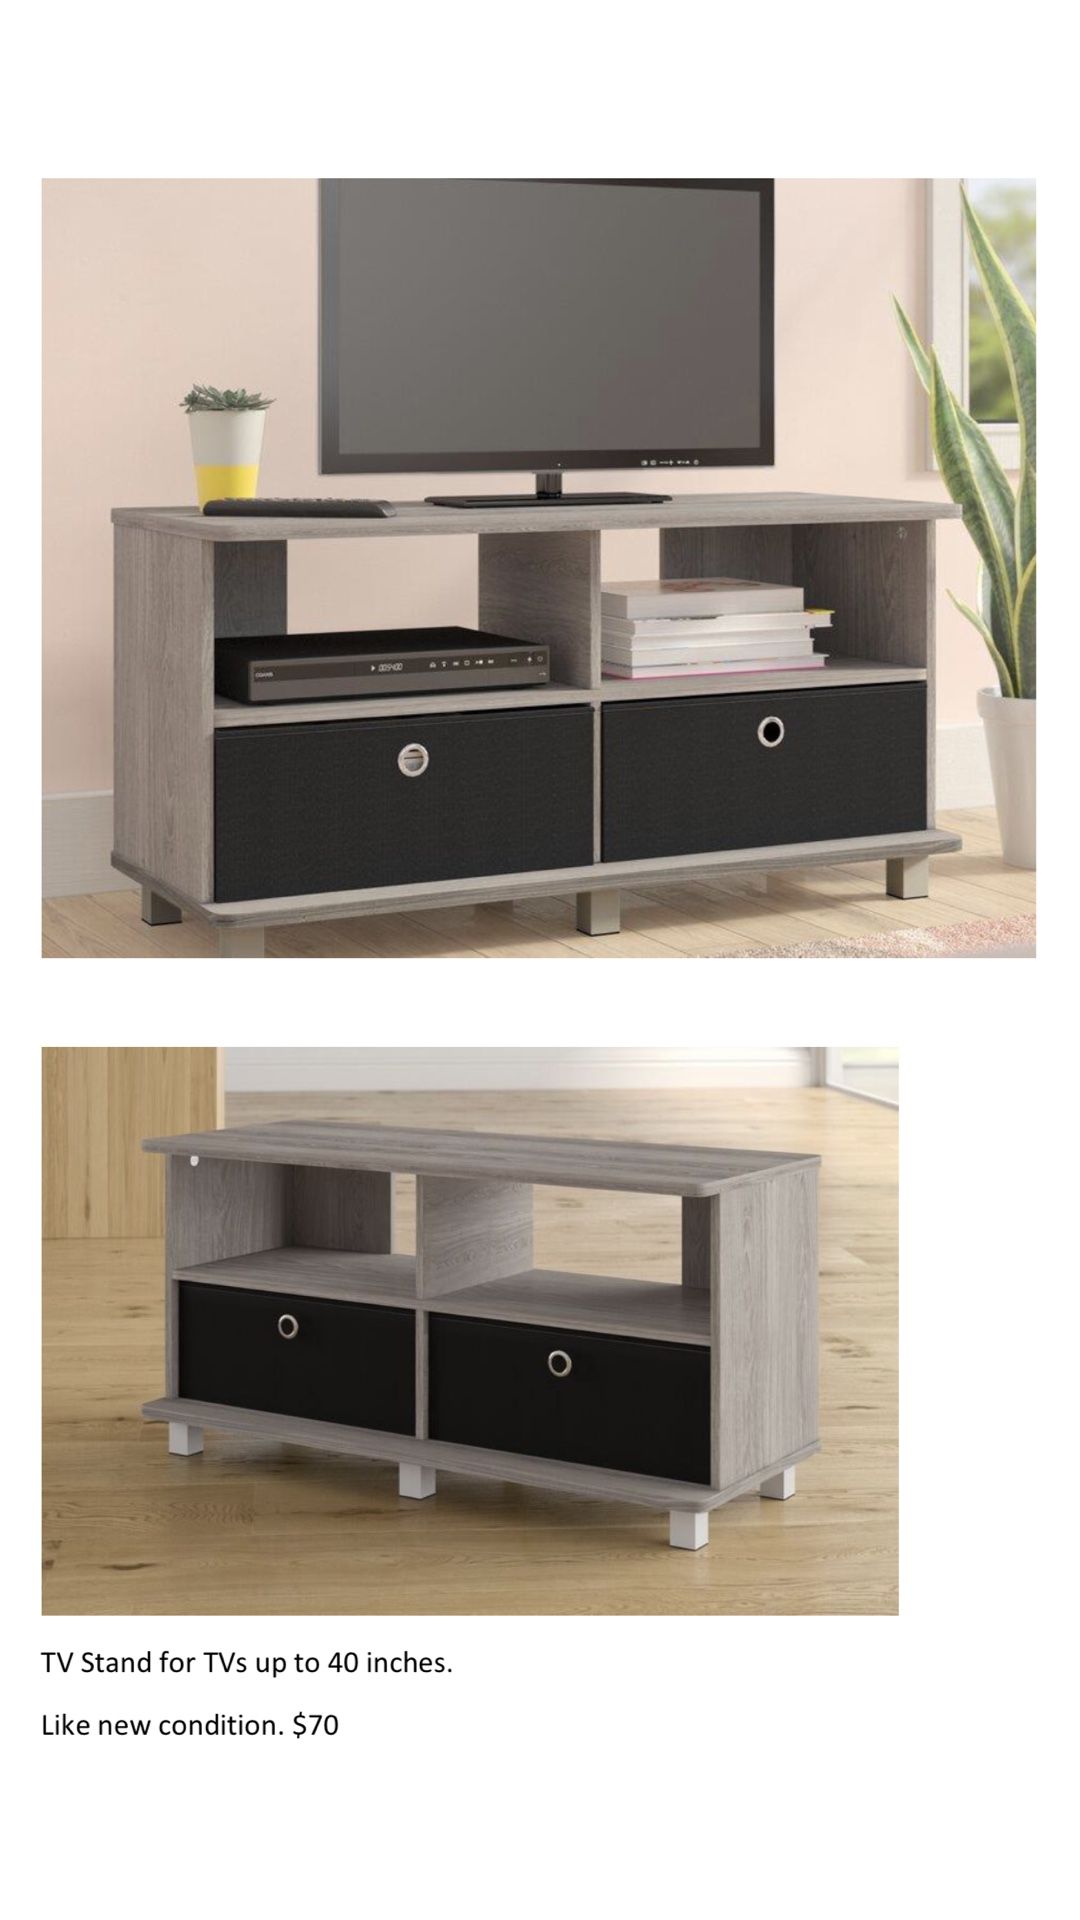 Warm grey tv stand for TVs up to 40”